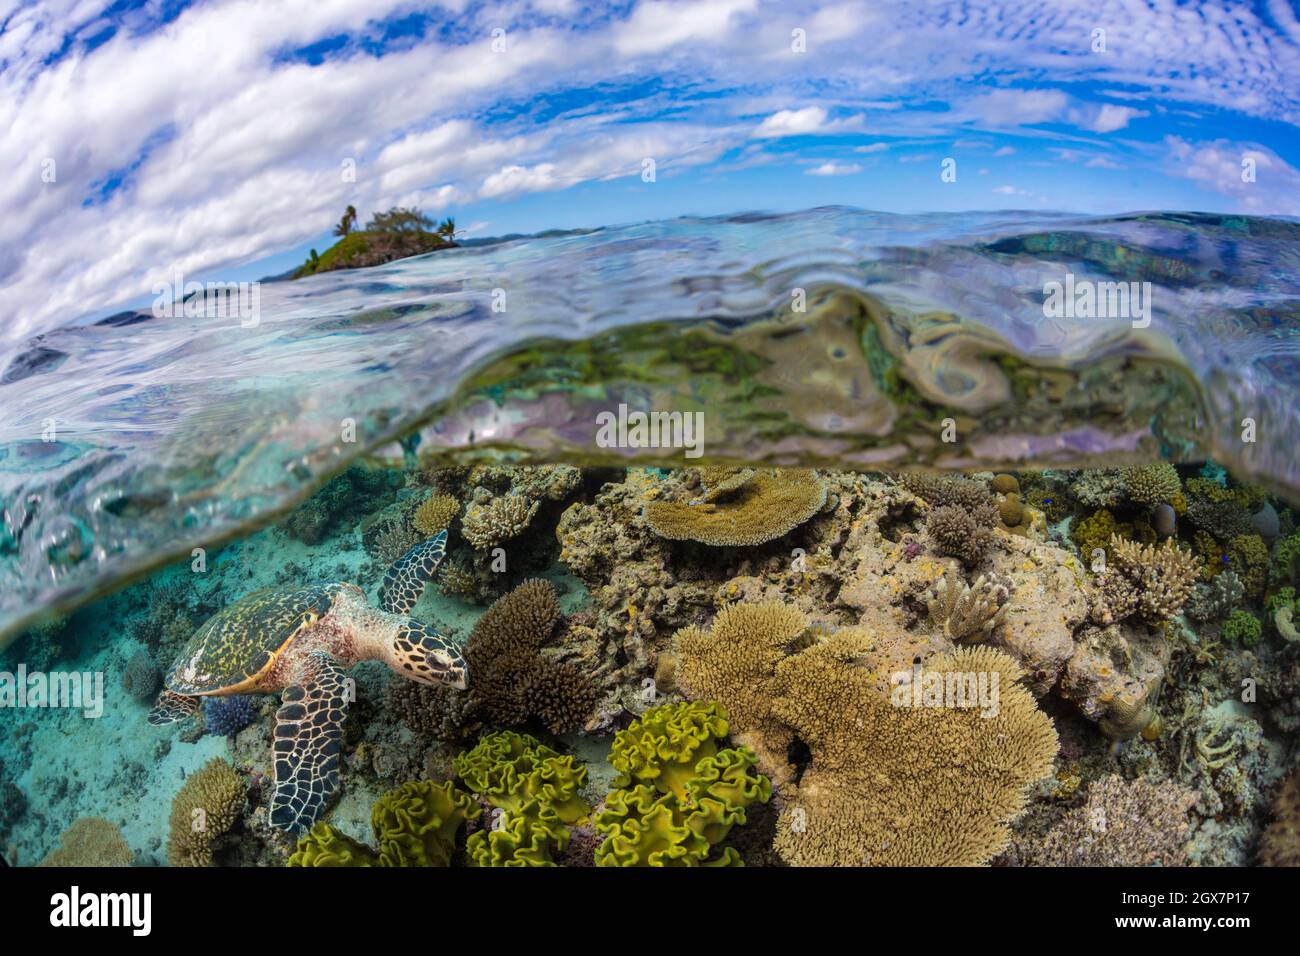 A split image of a hawksbill turtle, Eretmochelys imbricata, inspecting a shallow reef off Two Tree Island above, off Kadavu Island in the southeast c Stock Photo